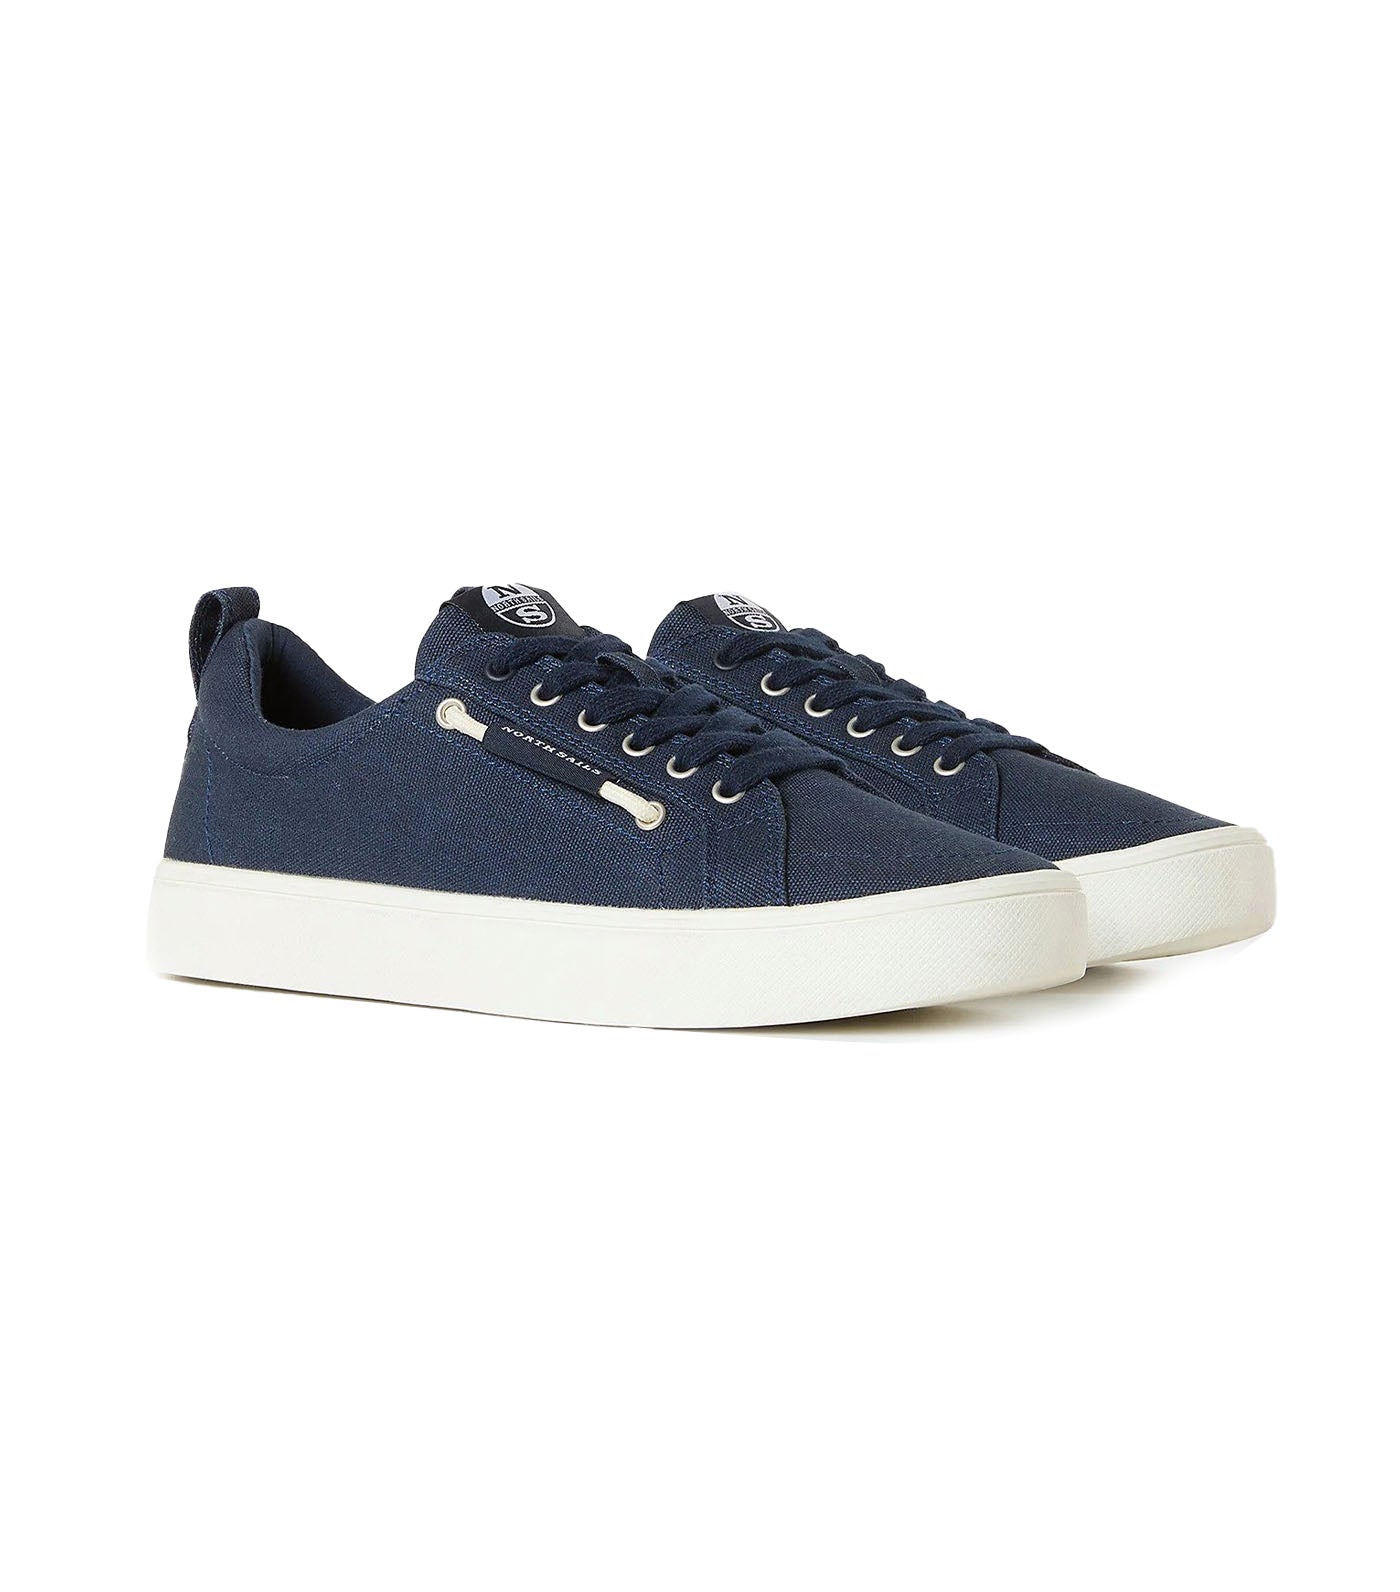 North Sails Reef Chrome Sneakers Navy